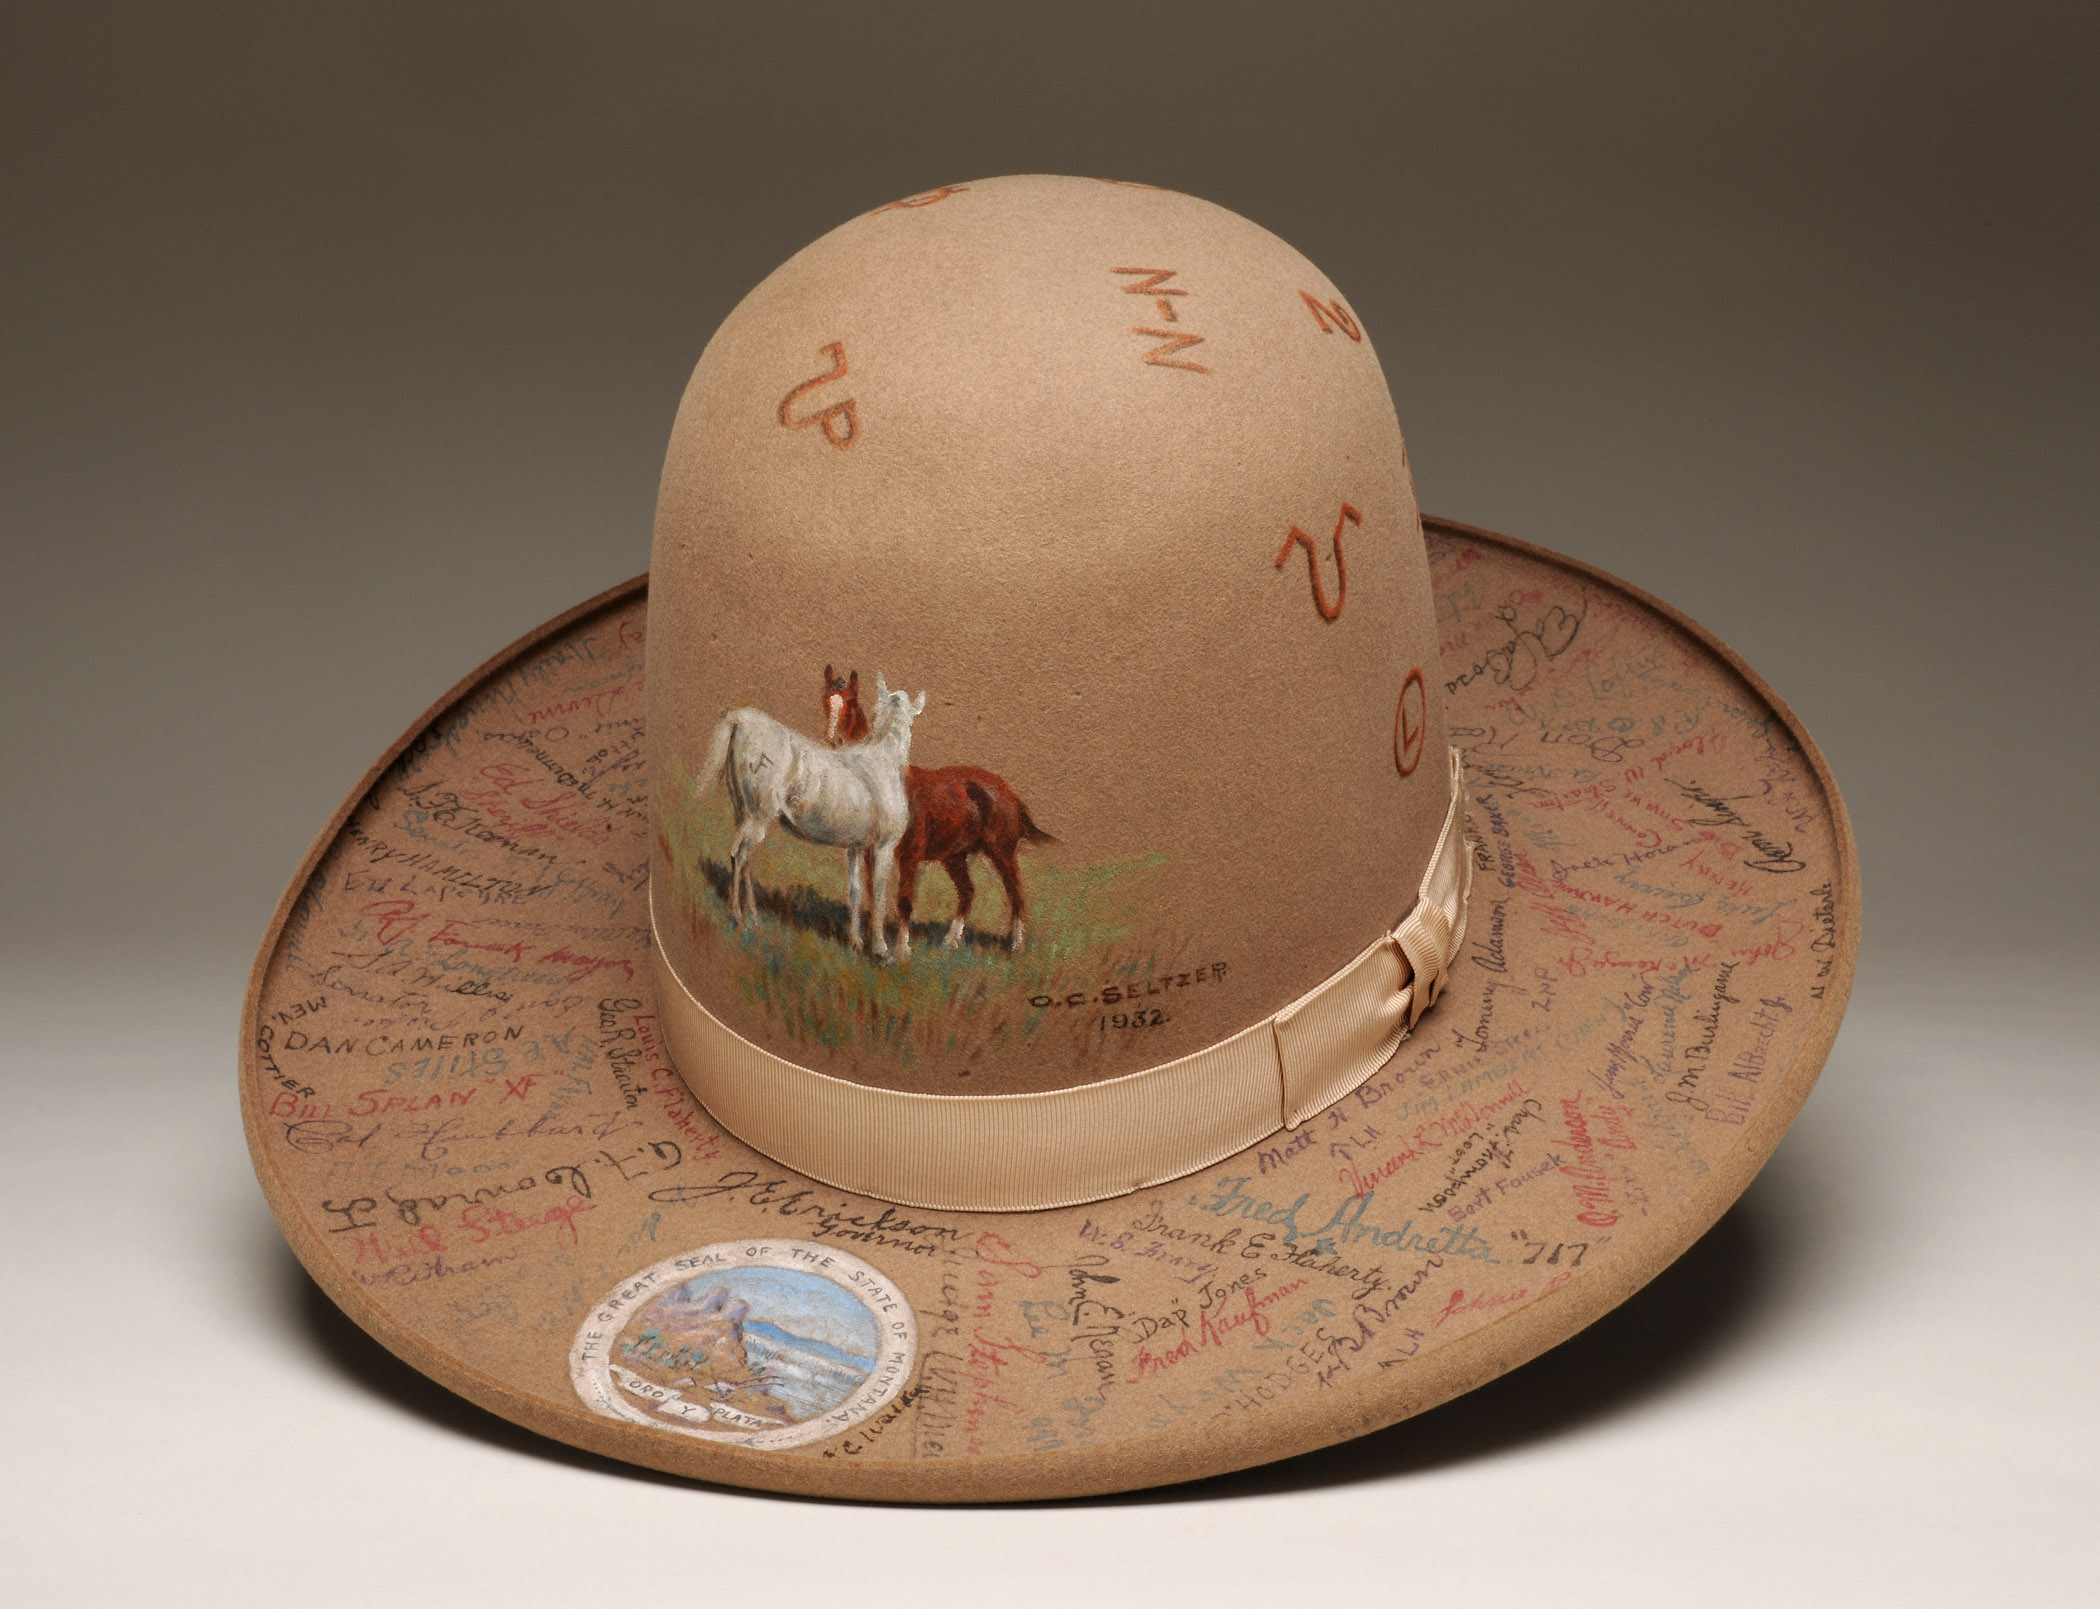 Autographed Stetson, Illustrated by O. C. Seltzer, 1932, MHS X1966.29.01, Gift of John L. Fogarty